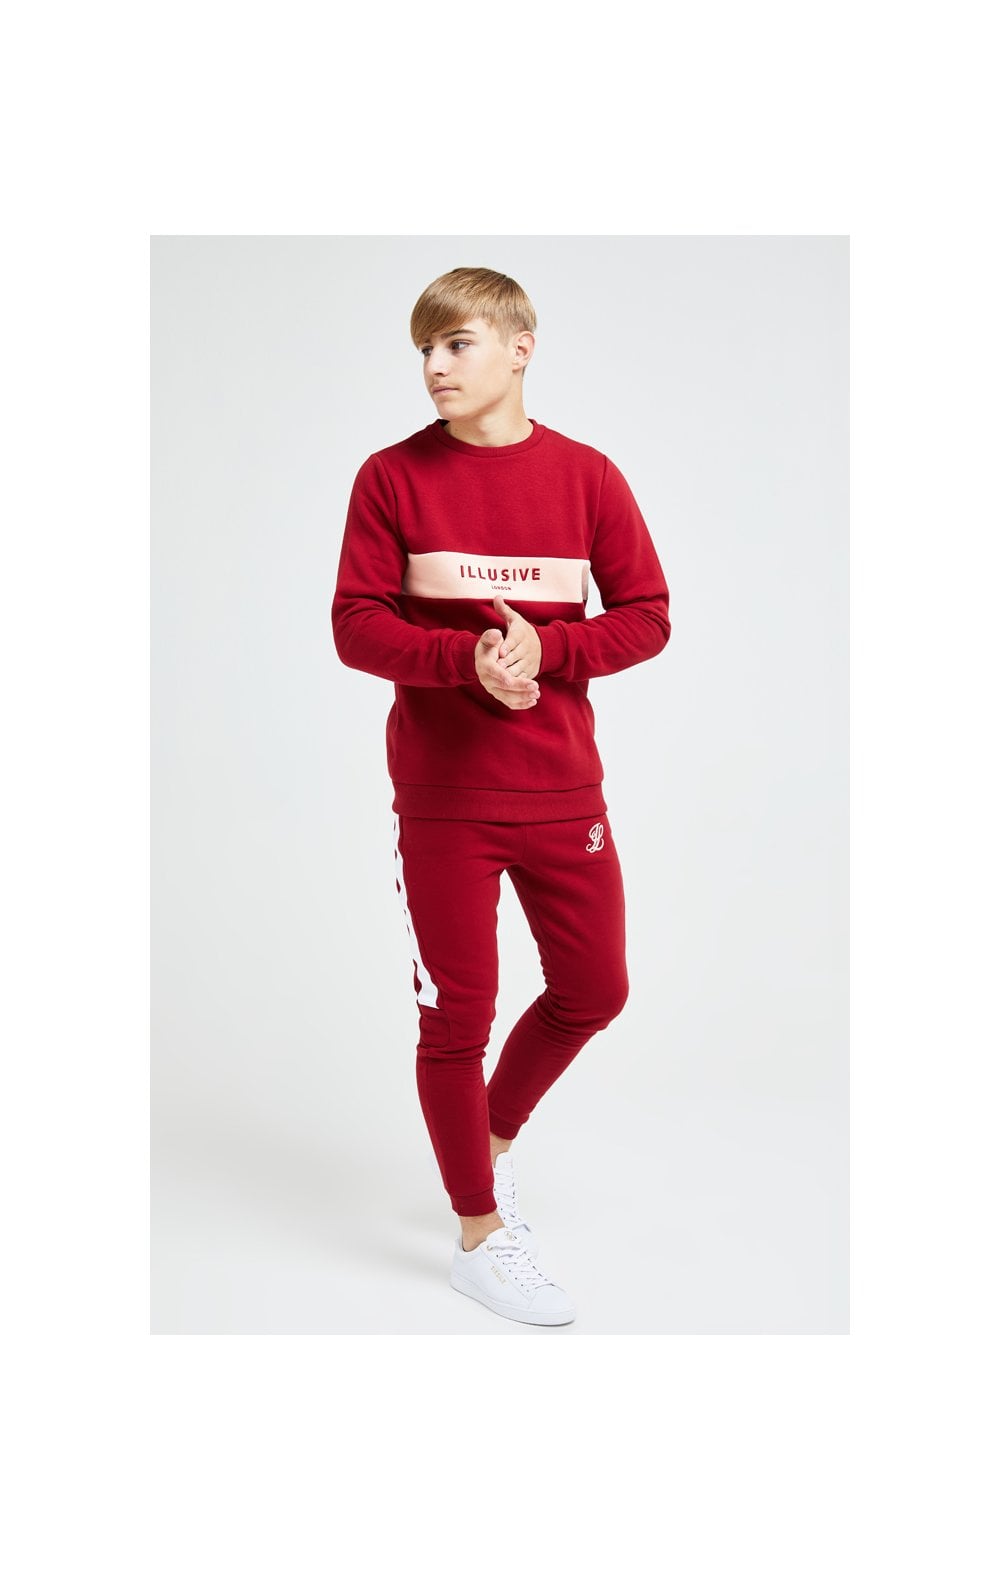 Illusive London Divergence Crew Sweater - Red & Pink (2)